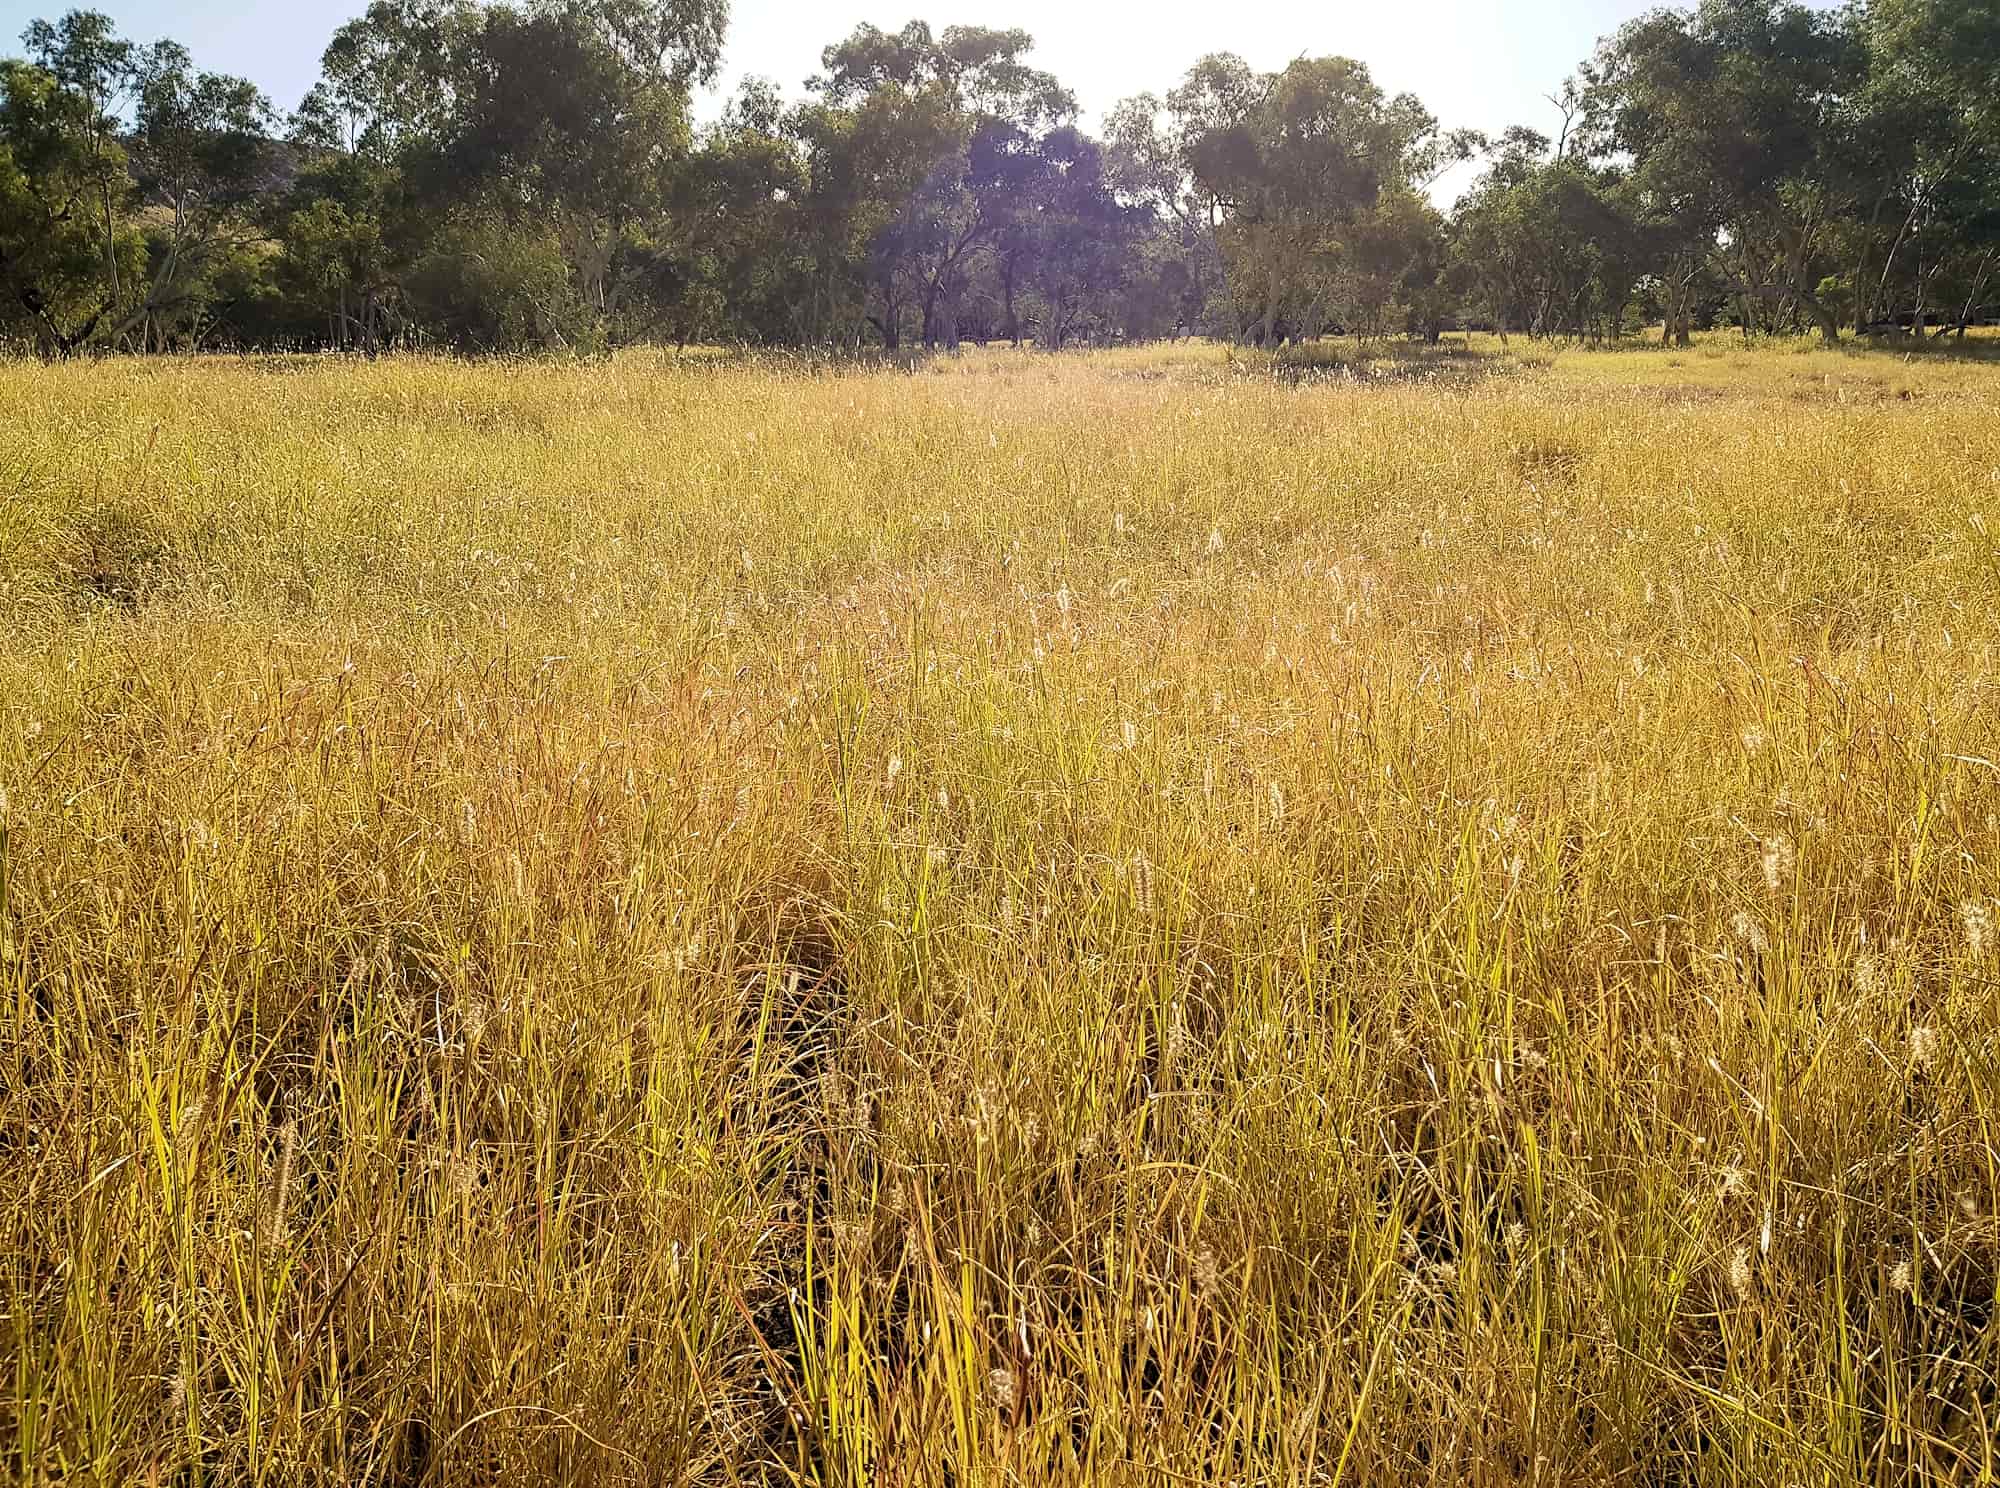 Buffel grass (Cenchrus ciliaris), Todd River, Alice Springs, NT